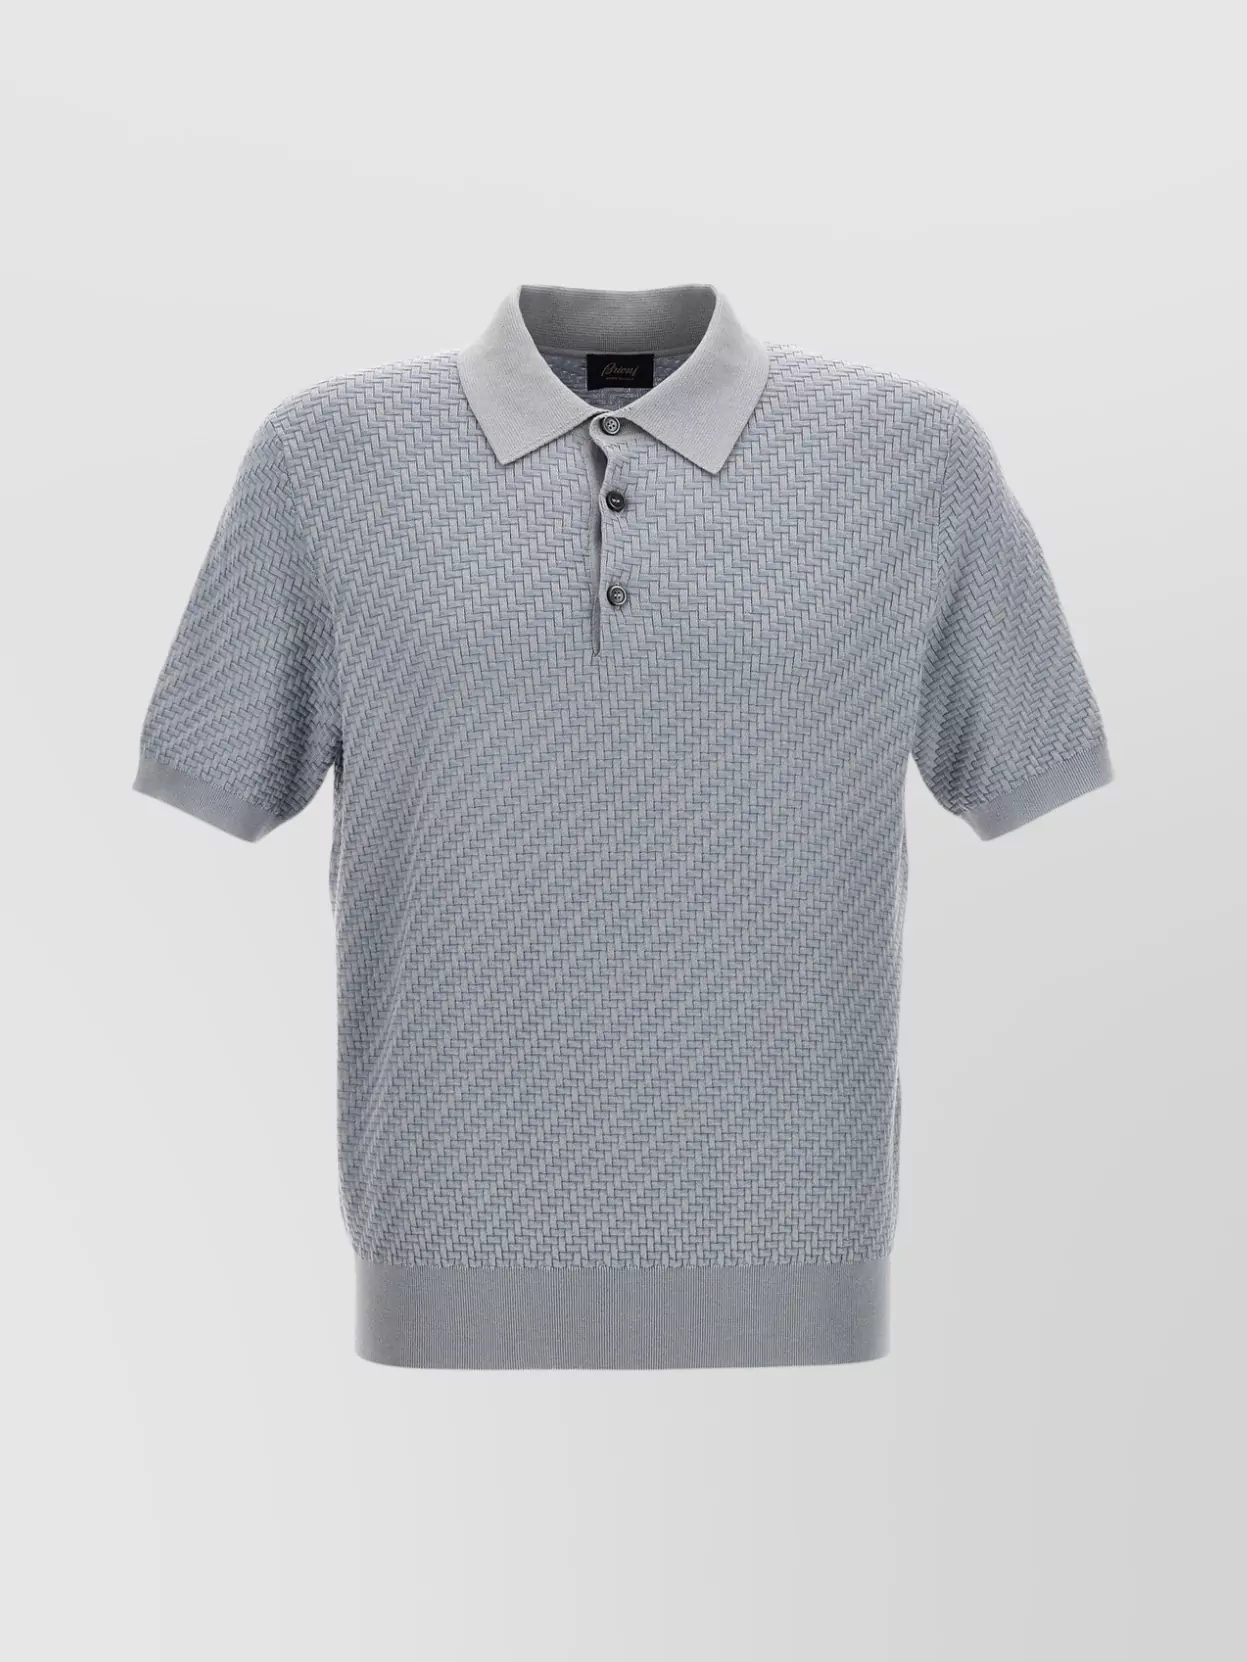 Brioni Knit Polo Shirt Textured Pattern In Gray